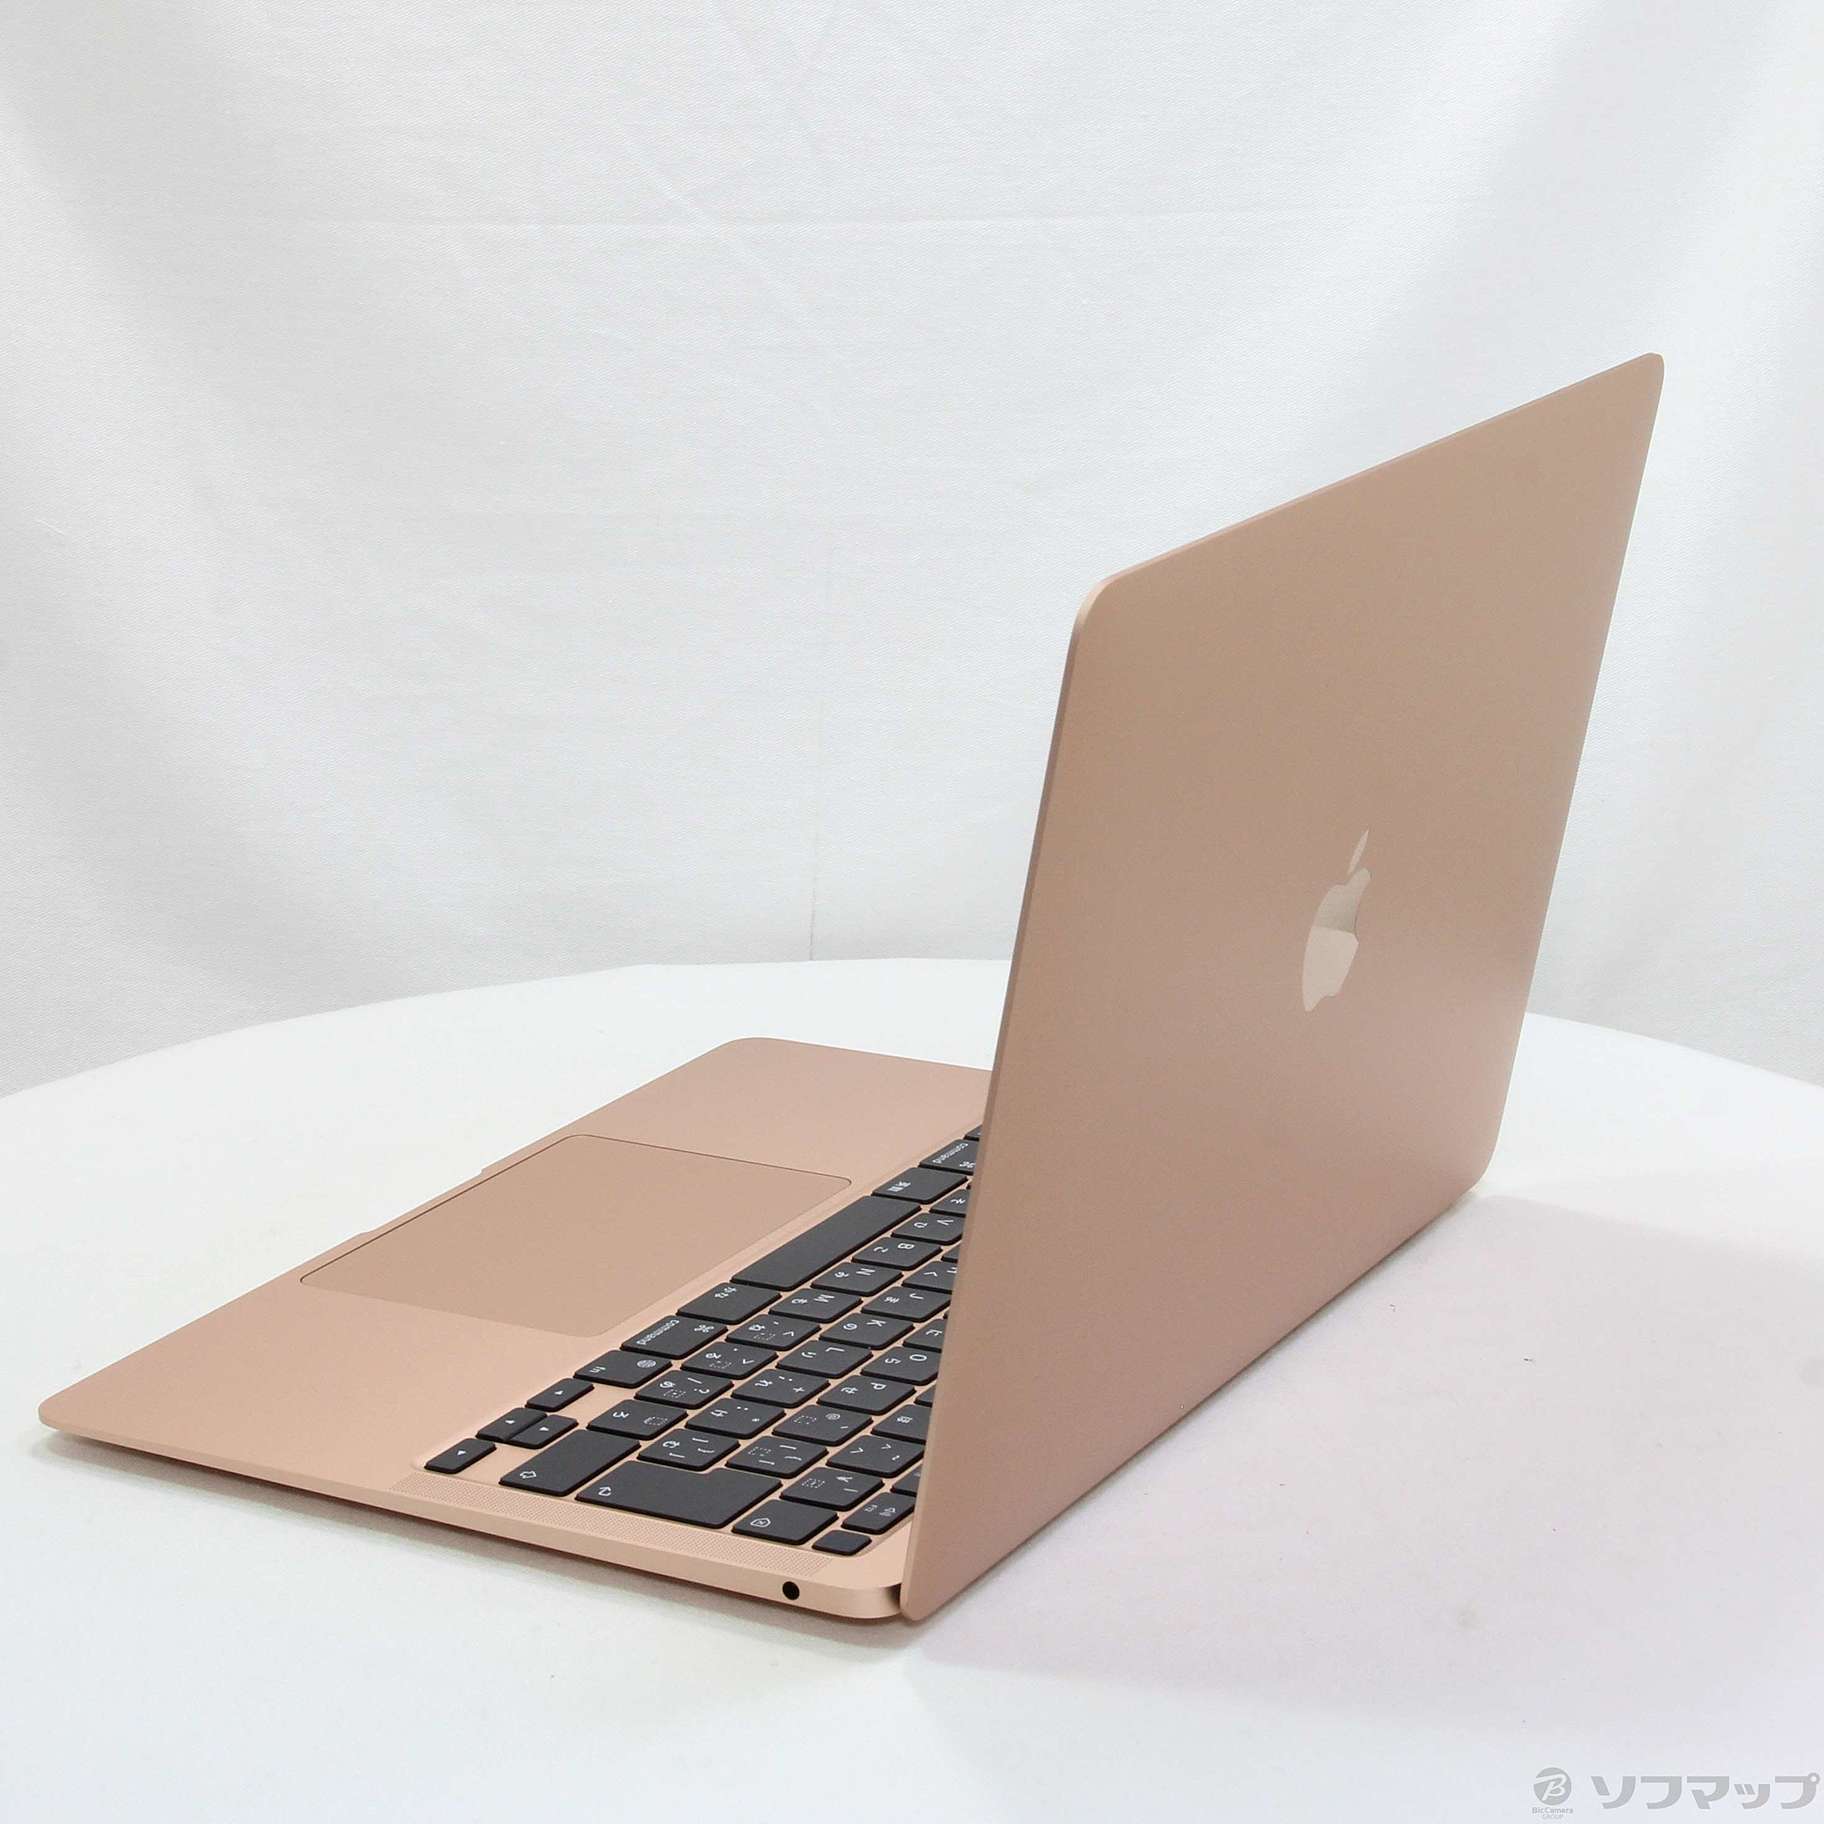 Macbook air2020 [M1] MGND3J/A ジャンク